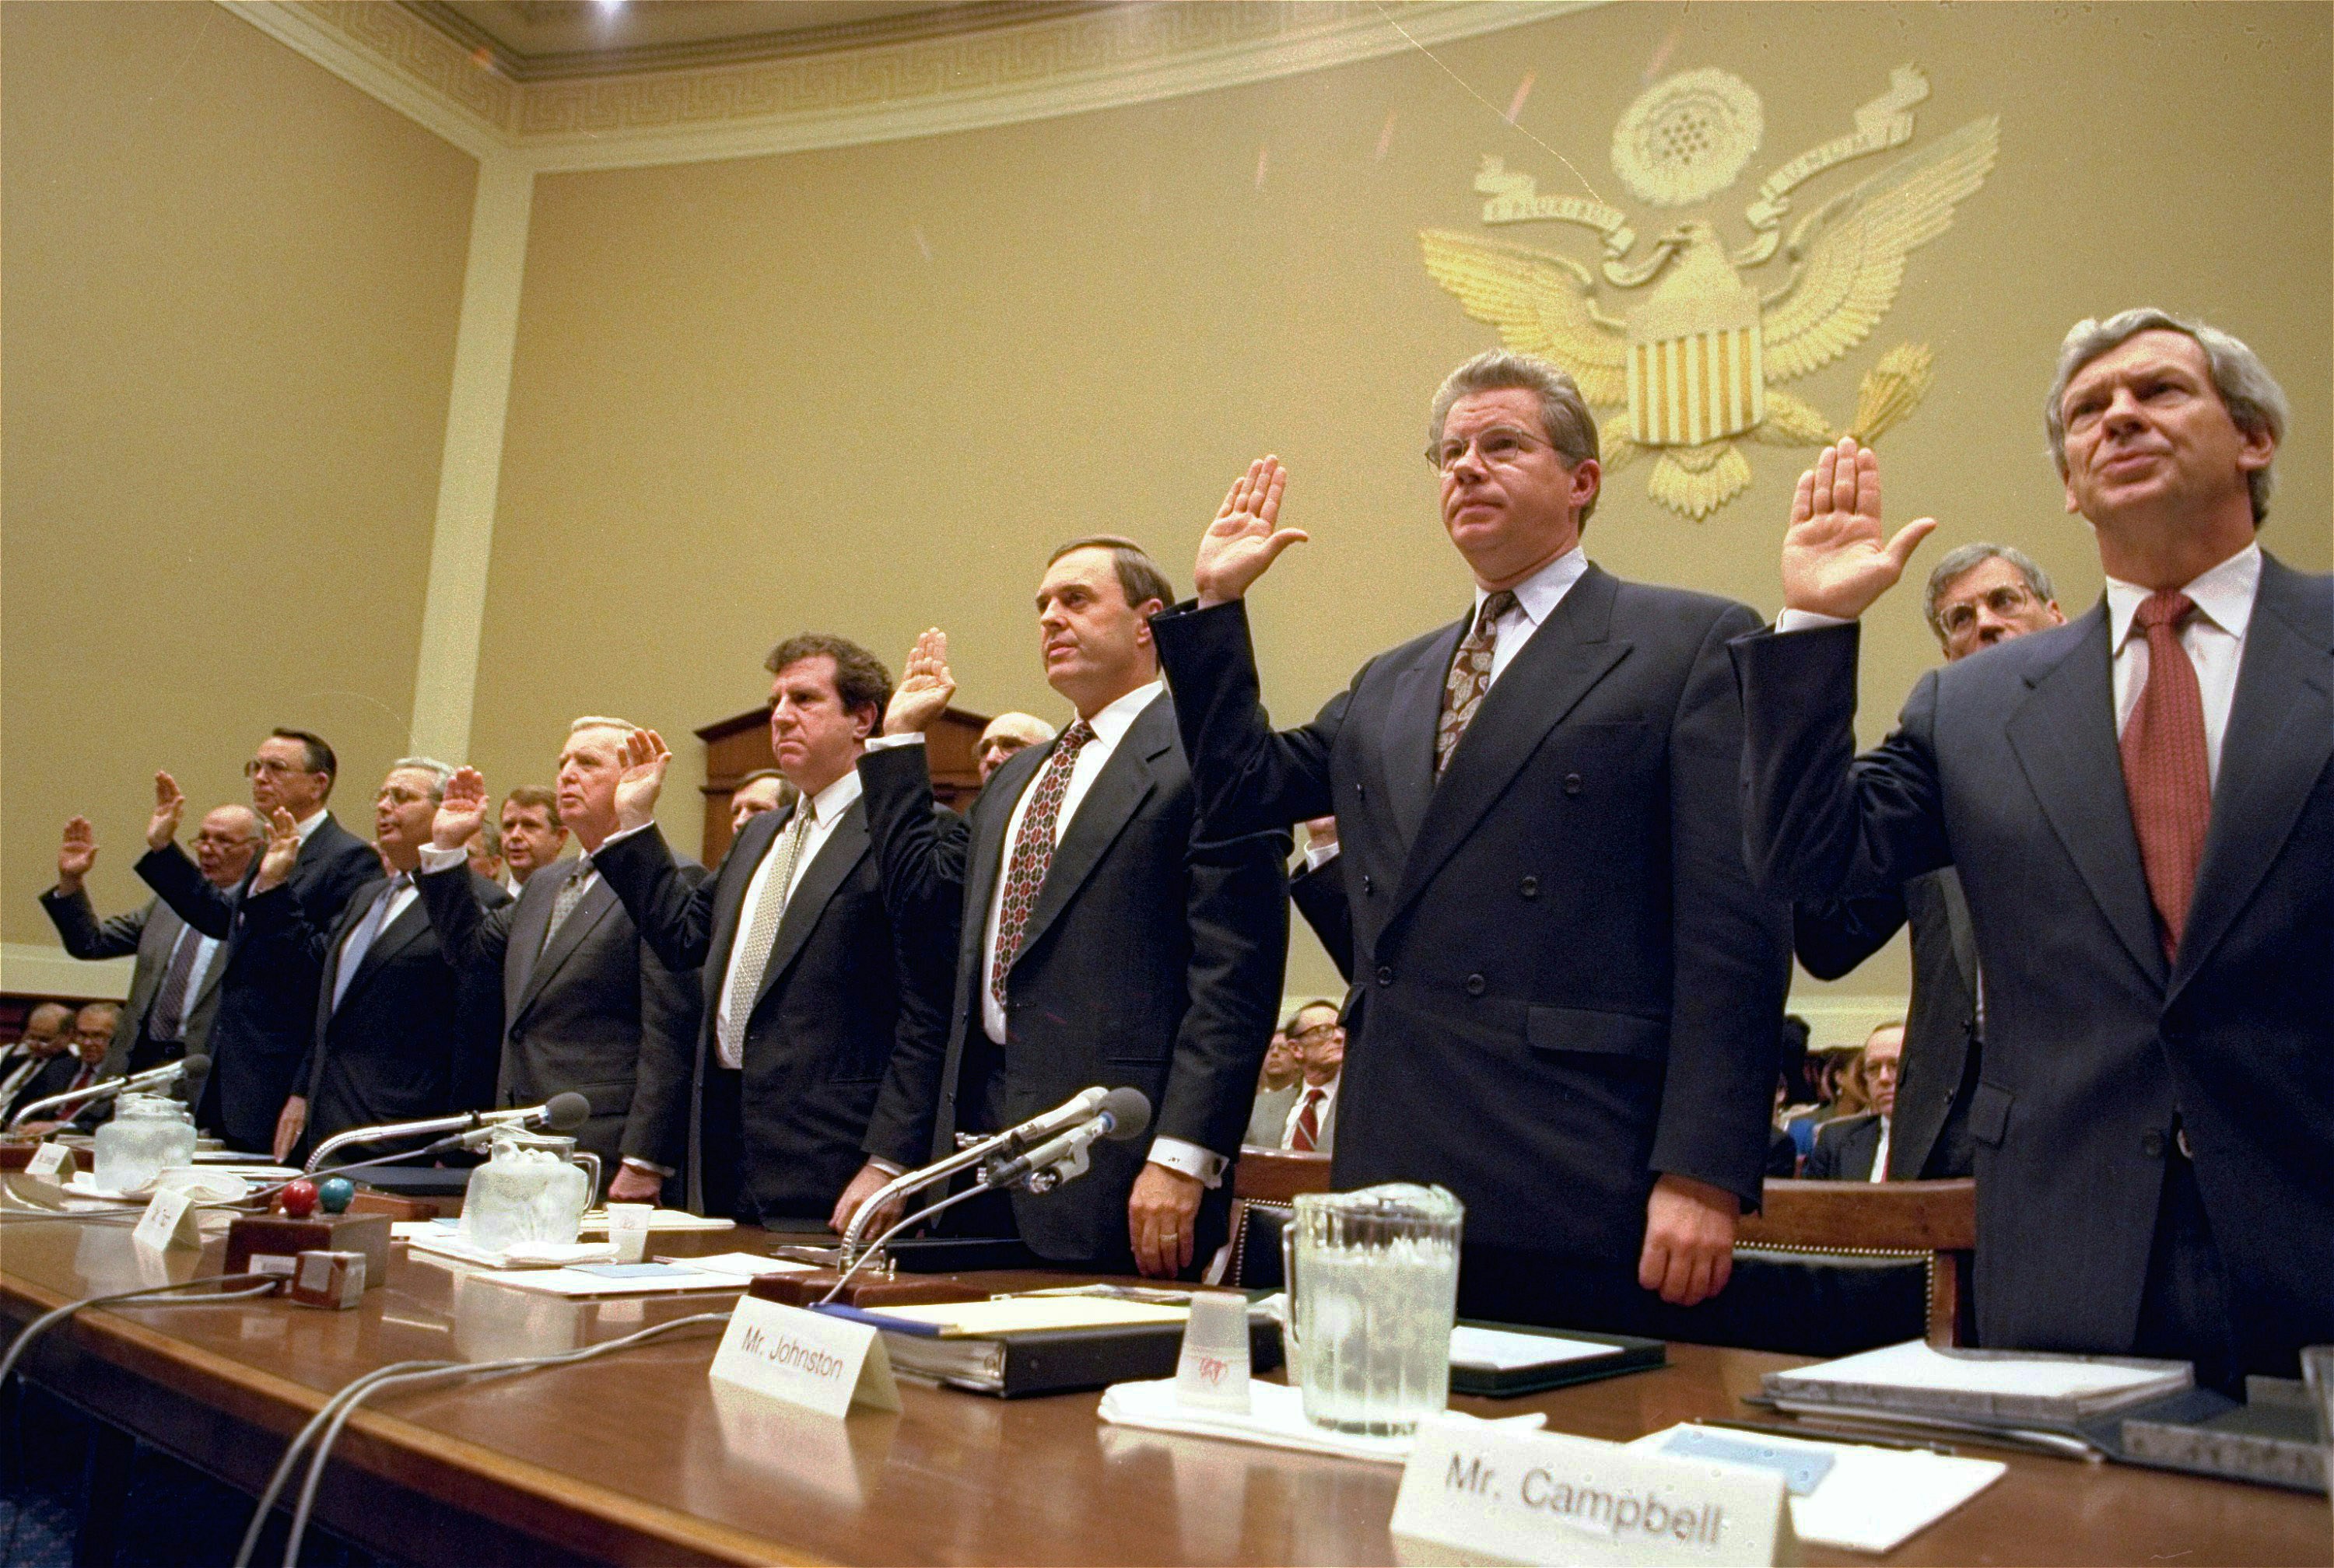 FILE - In this Thursday, April 14, 1994 file photo, the heads of the nation's largest cigarette companies are sworn in before a hearing of a House Energy subcommittee which was holding hearings on the contents of cigarettes on Capitol Hill in Washington. More than 40 states brought lawsuits demanding compensation for the costs of treating smoking-related illnesses. Big Tobacco settled in 1998 by agreeing to pay about $200 billion and curtail marketing of cigarettes to youths. From left are Robert Sprinkle III, executive vice president for Research American Tobacco Co.; Donald Johnston, American Tobacco; Thomas Sandefur Jr., Brown and Williamson Tobacco Corp.; Edward Horrigan Jr., Liggett Group Inc.; Andrews Tisch, Lorillard Tobacco Co.; Joseph Taddeo, U.S. Tobacco Co.; James Johnston, RJ Reynolds; and William Campbell, Phillip Morris USA. (AP Photo/John Duricka)